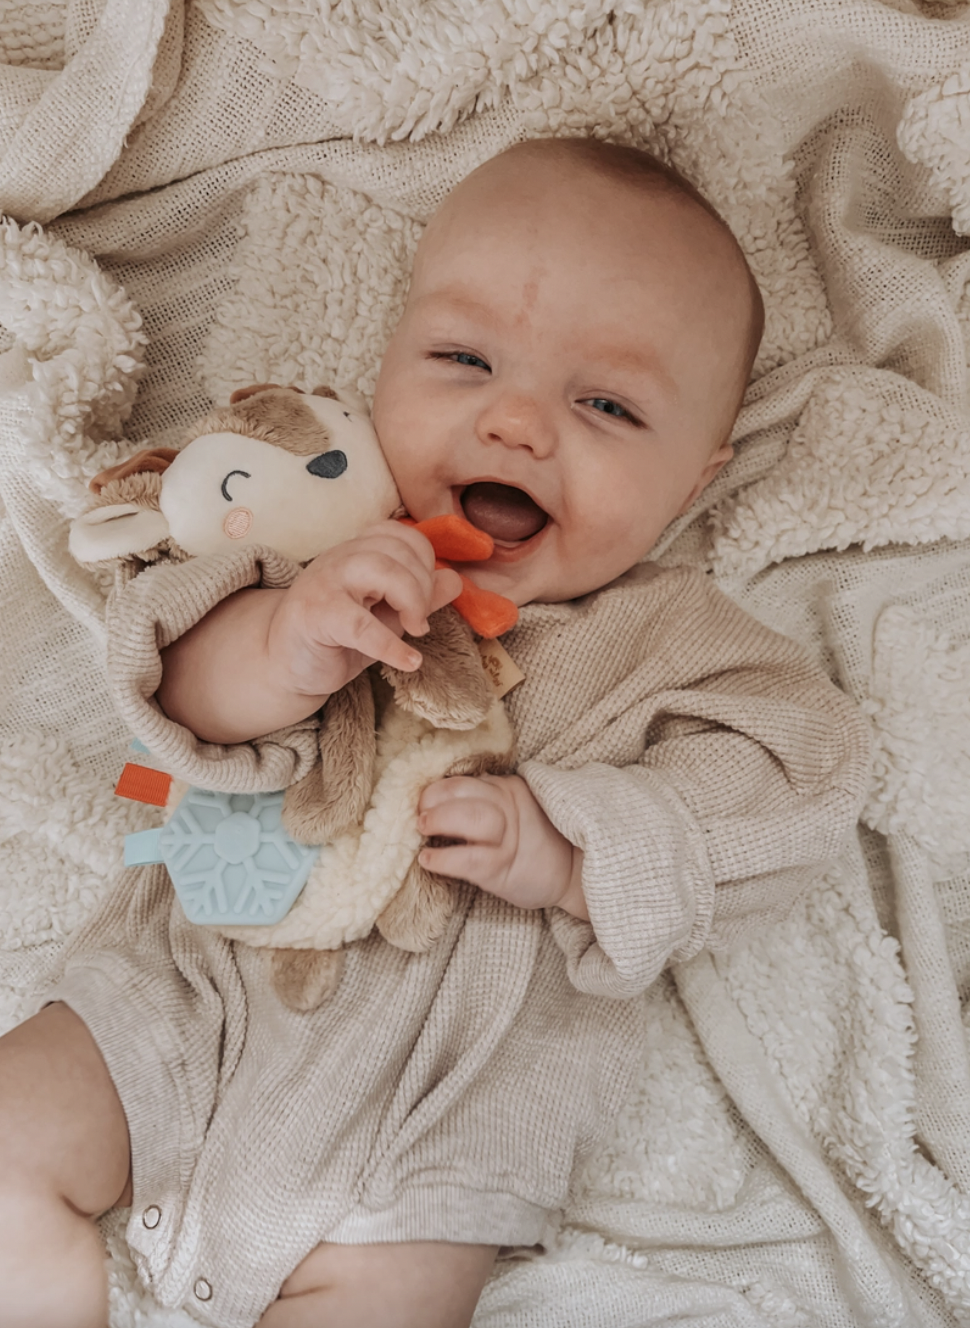 Cuddle &amp; Bond! Our snuggly Itzy Lovey™ features soft sherpa fabric and textured ribbons that baby will love to explore! A textured silicone teether helps massage